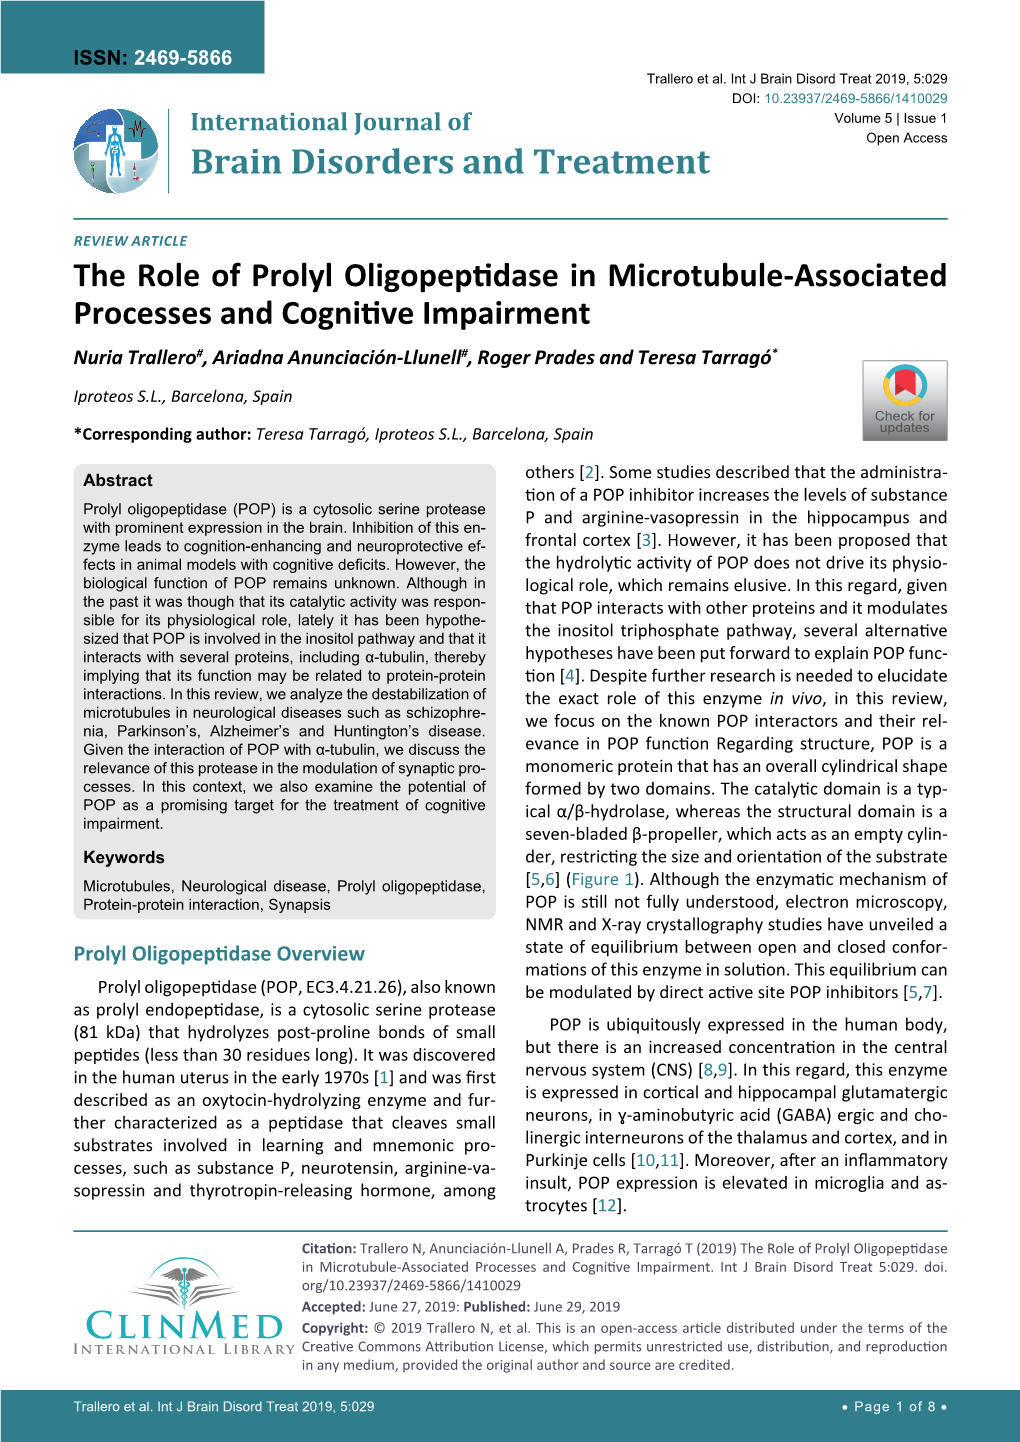 The Role of Prolyl Oligopeptidase in Microtubule-Associated Processes